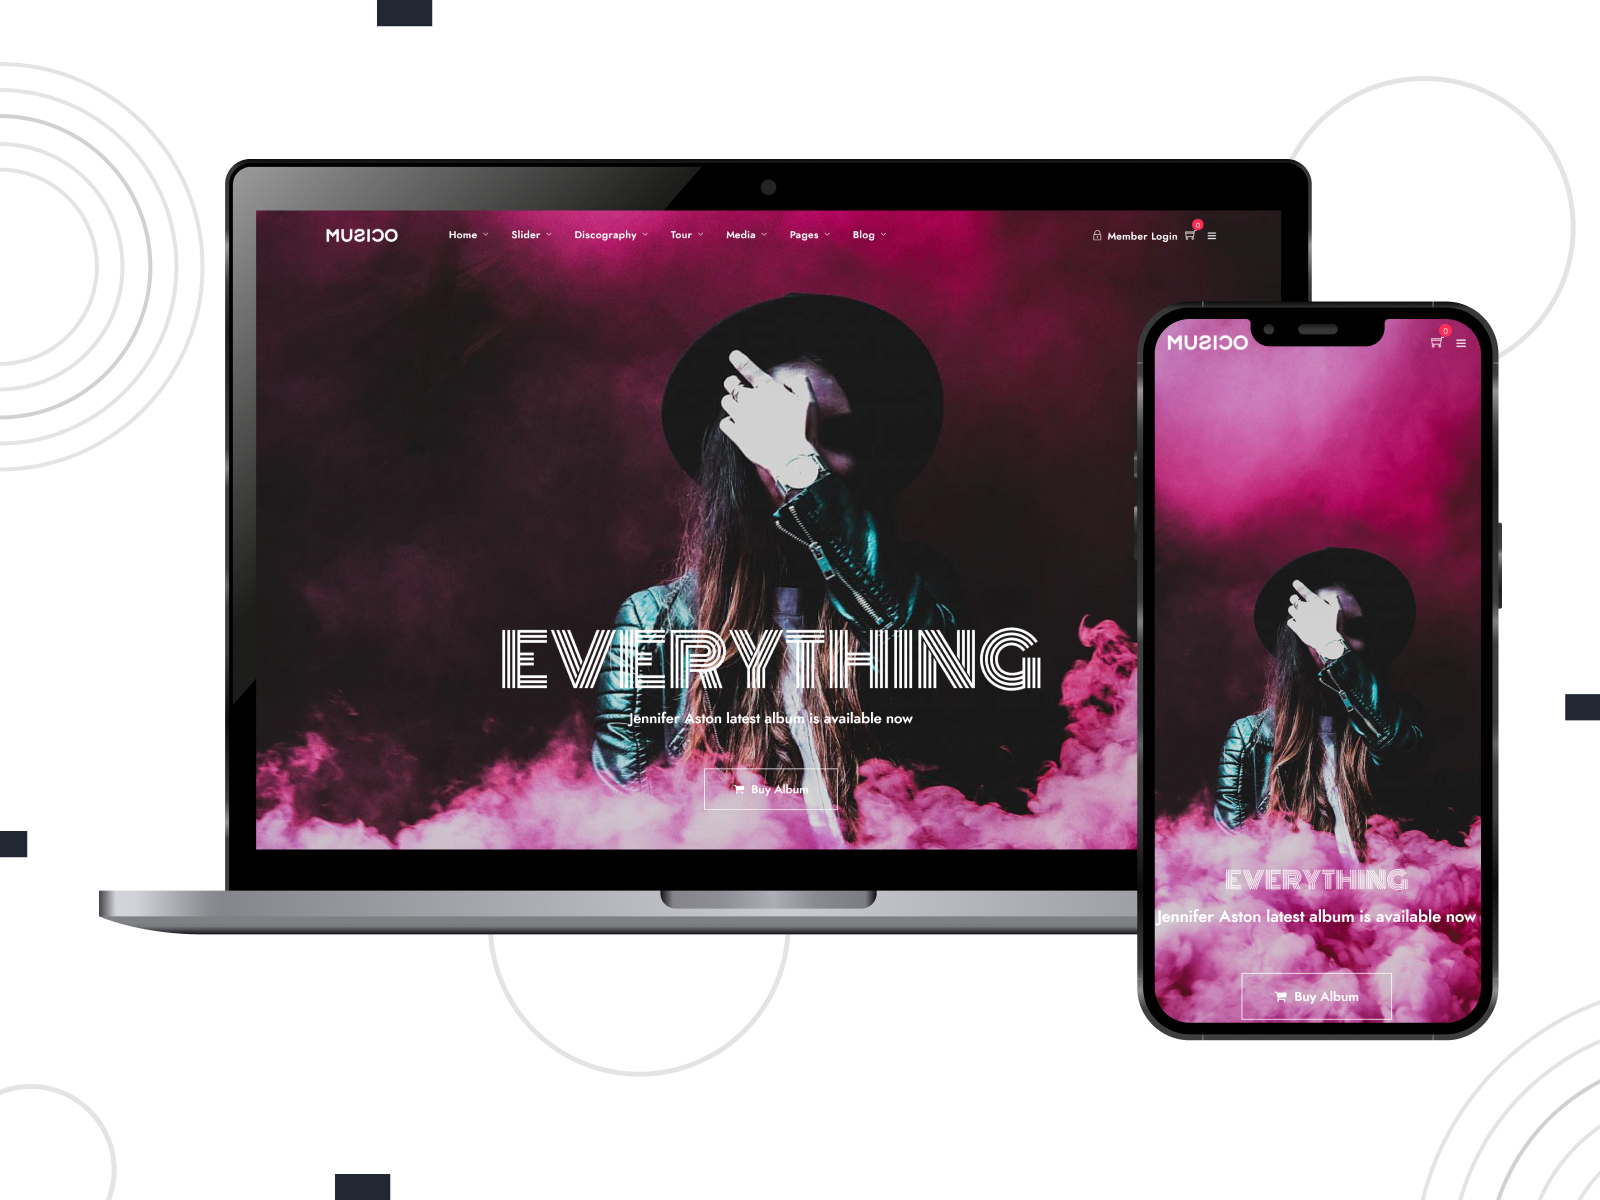 Picture of Music WordPress, a stylish WordPress theme for musicians with the WordPress Customizer integration.